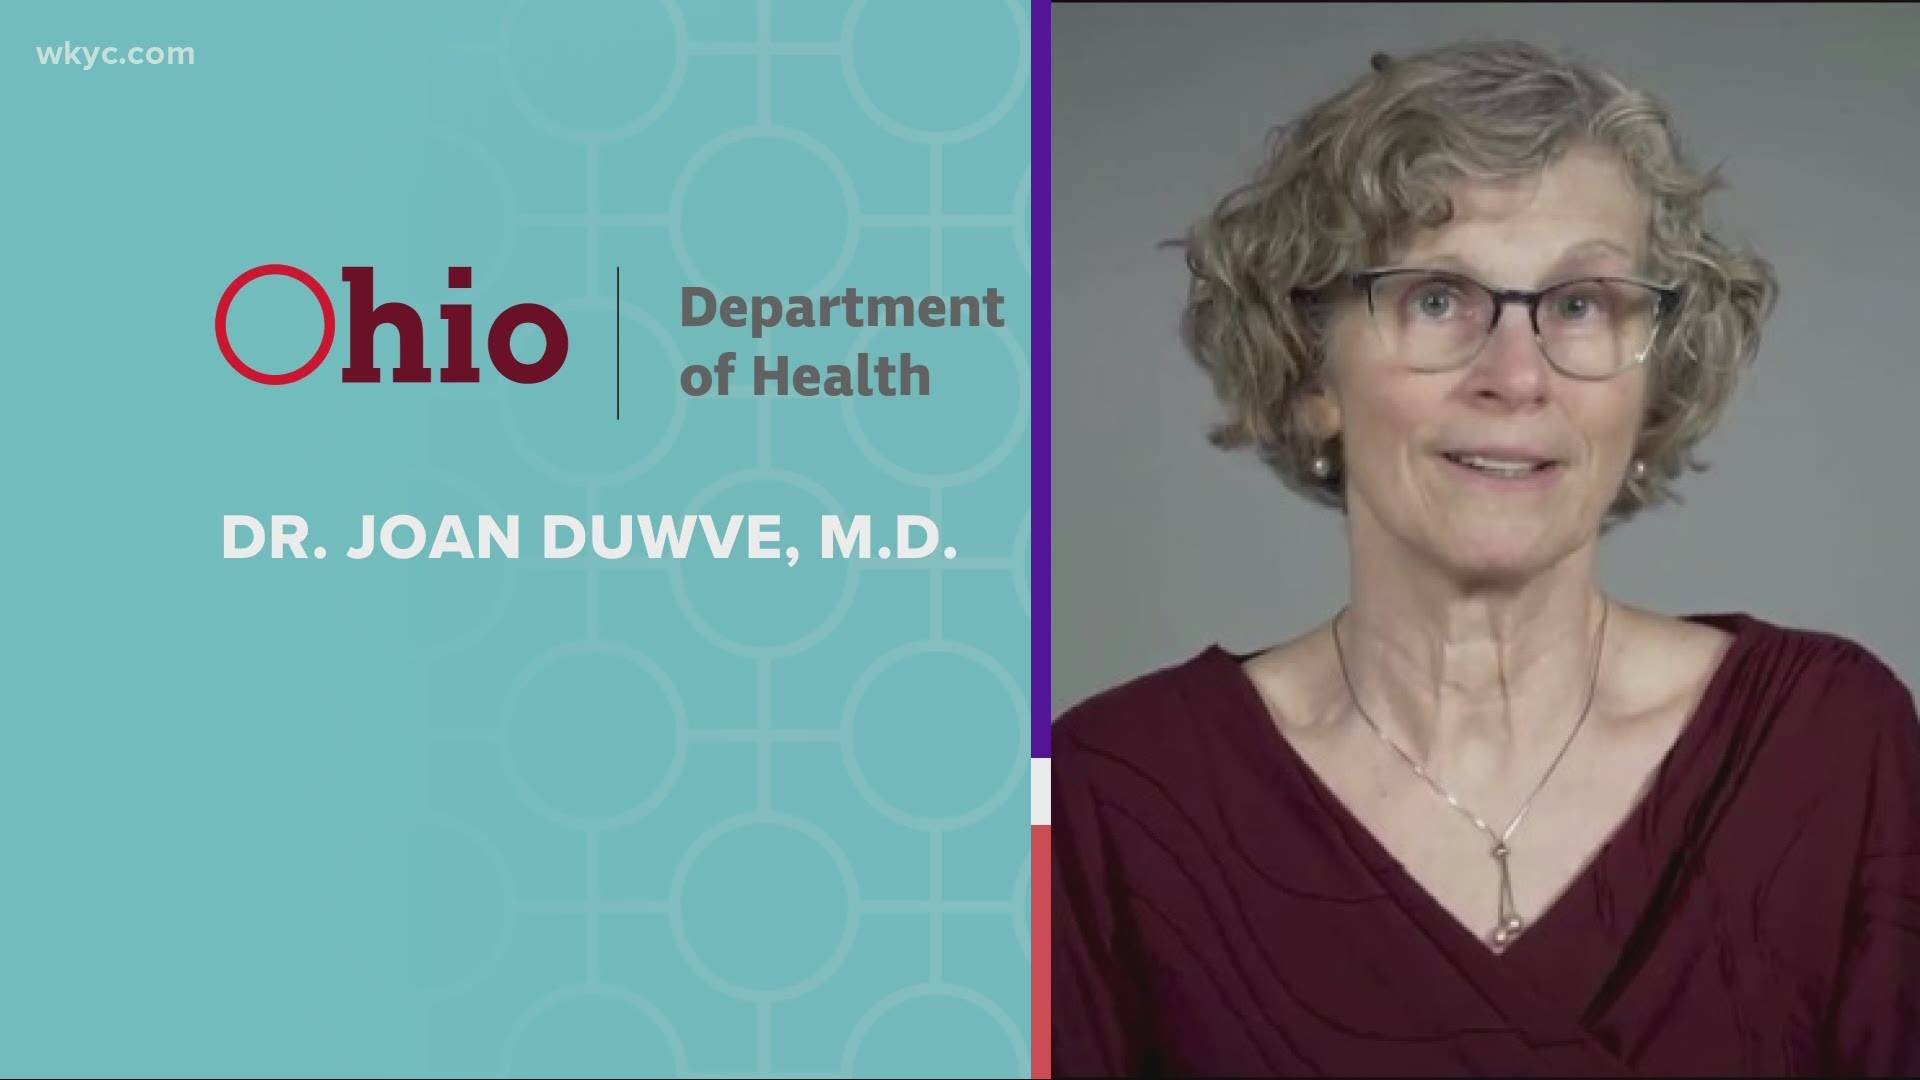 The search for Ohio's next Department of Health Director continues. Just hours after it  was announced Dr. Duwve says she's backing out for personal reasons.